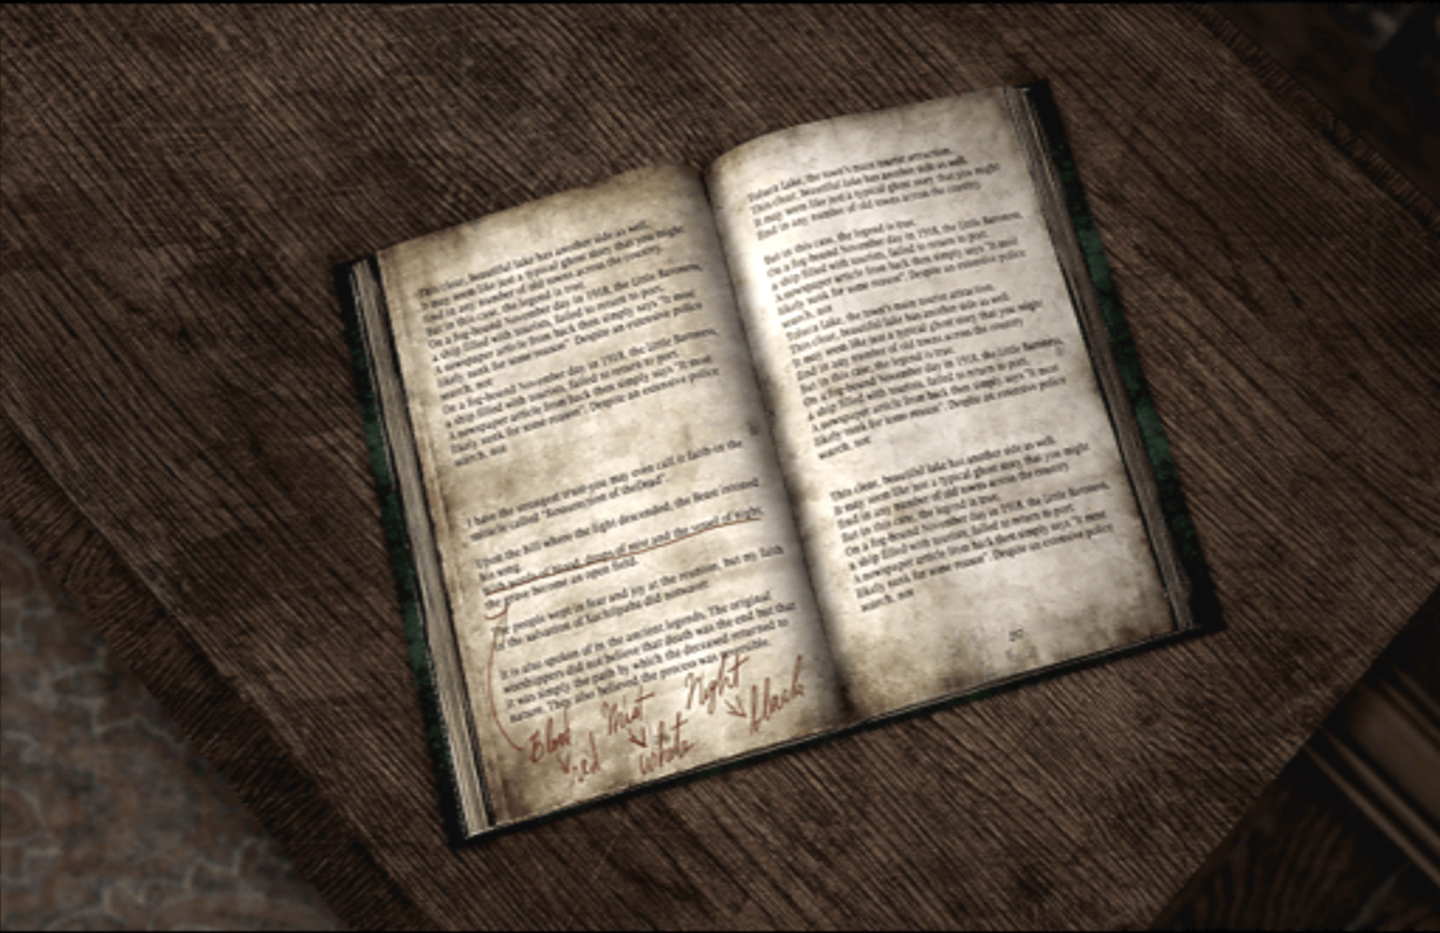 download book of lost memories silent hill 2 for free